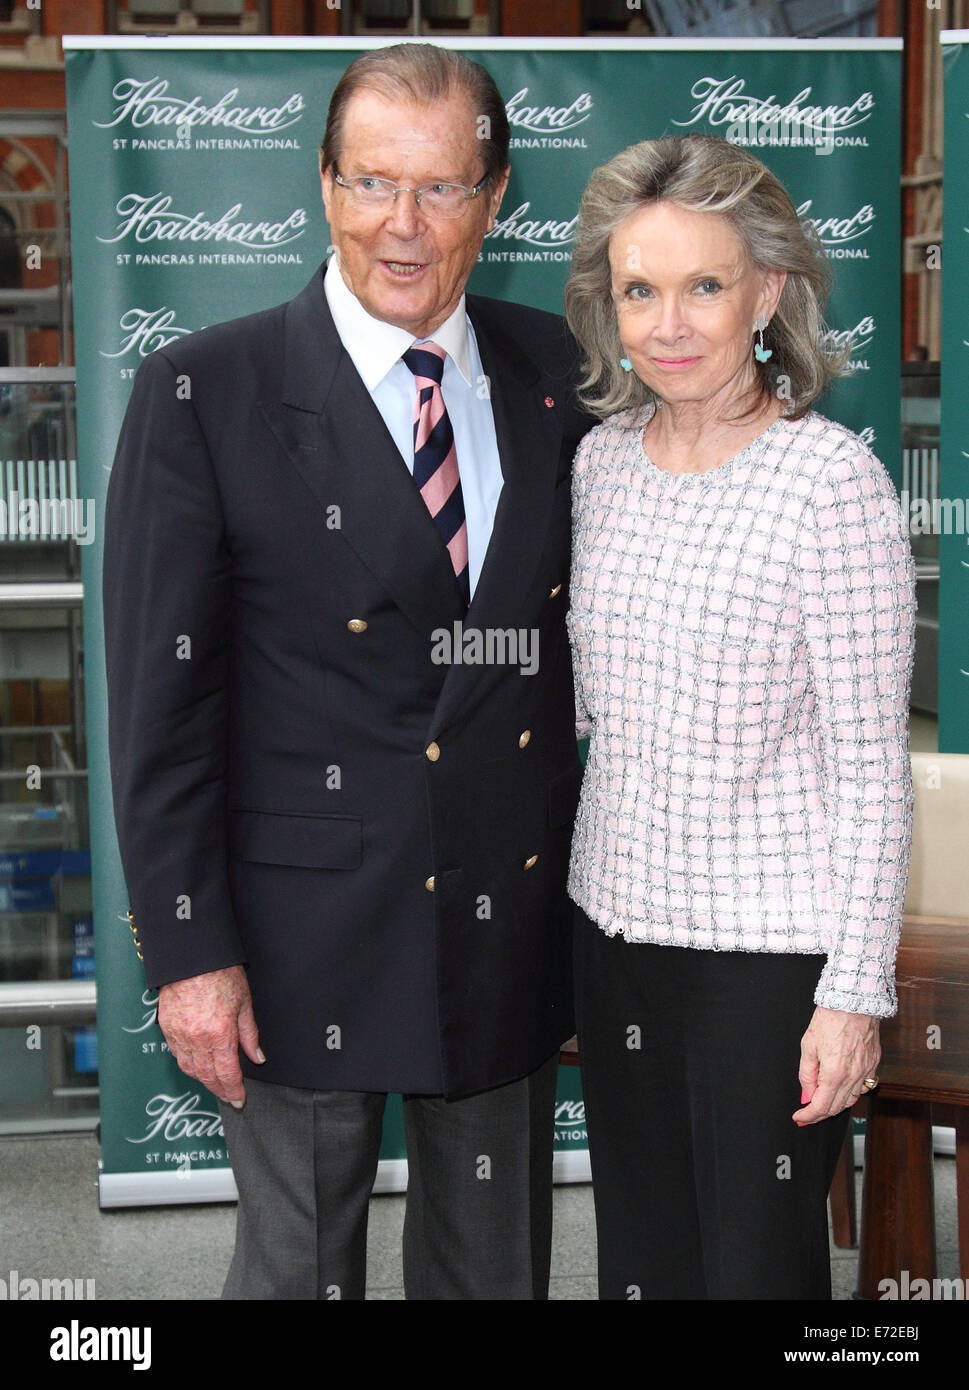 London, UK. 4th September, 2014. Sir Roger Moore - pictured with wife, Kristina Tholstrup - signs copies of his autobiography 'Last Man Standing: Tales From Tinseltown', at Hatchards St Pancras Station, on September 04 2014 in London, England   Credit:  KEITH MAYHEW/Alamy Live News Stock Photo